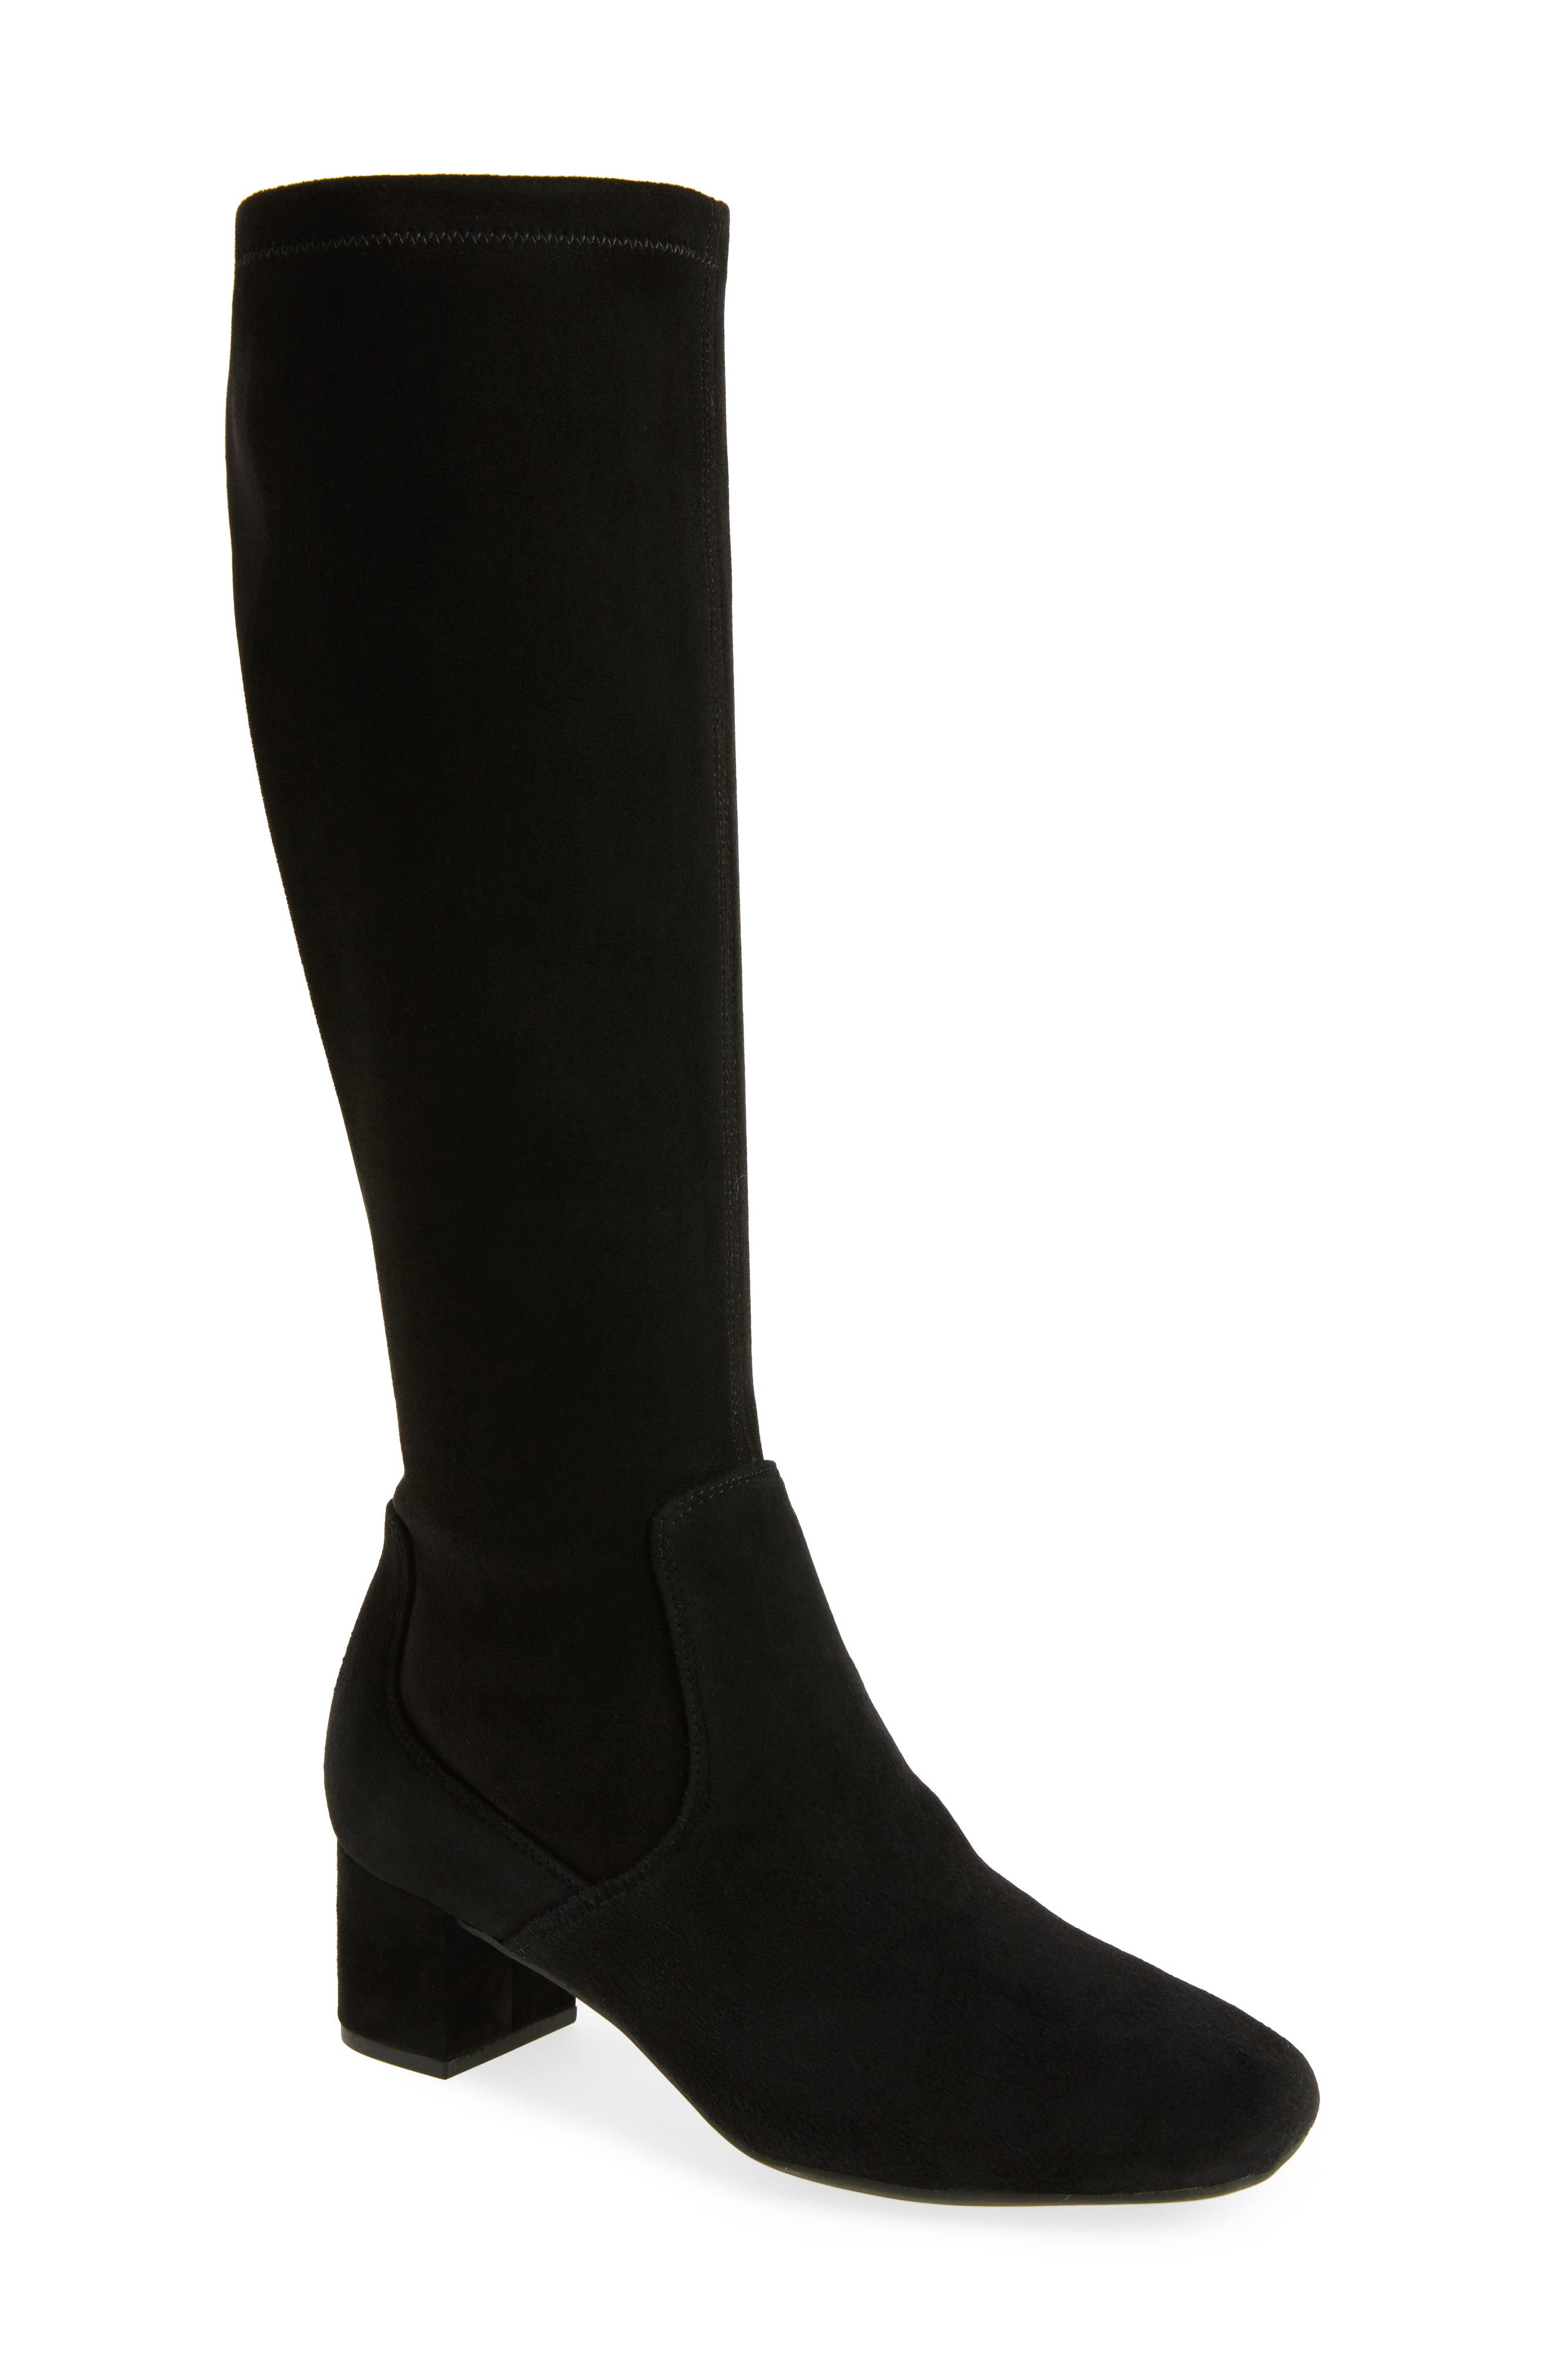 clarks tealia cup tall boots